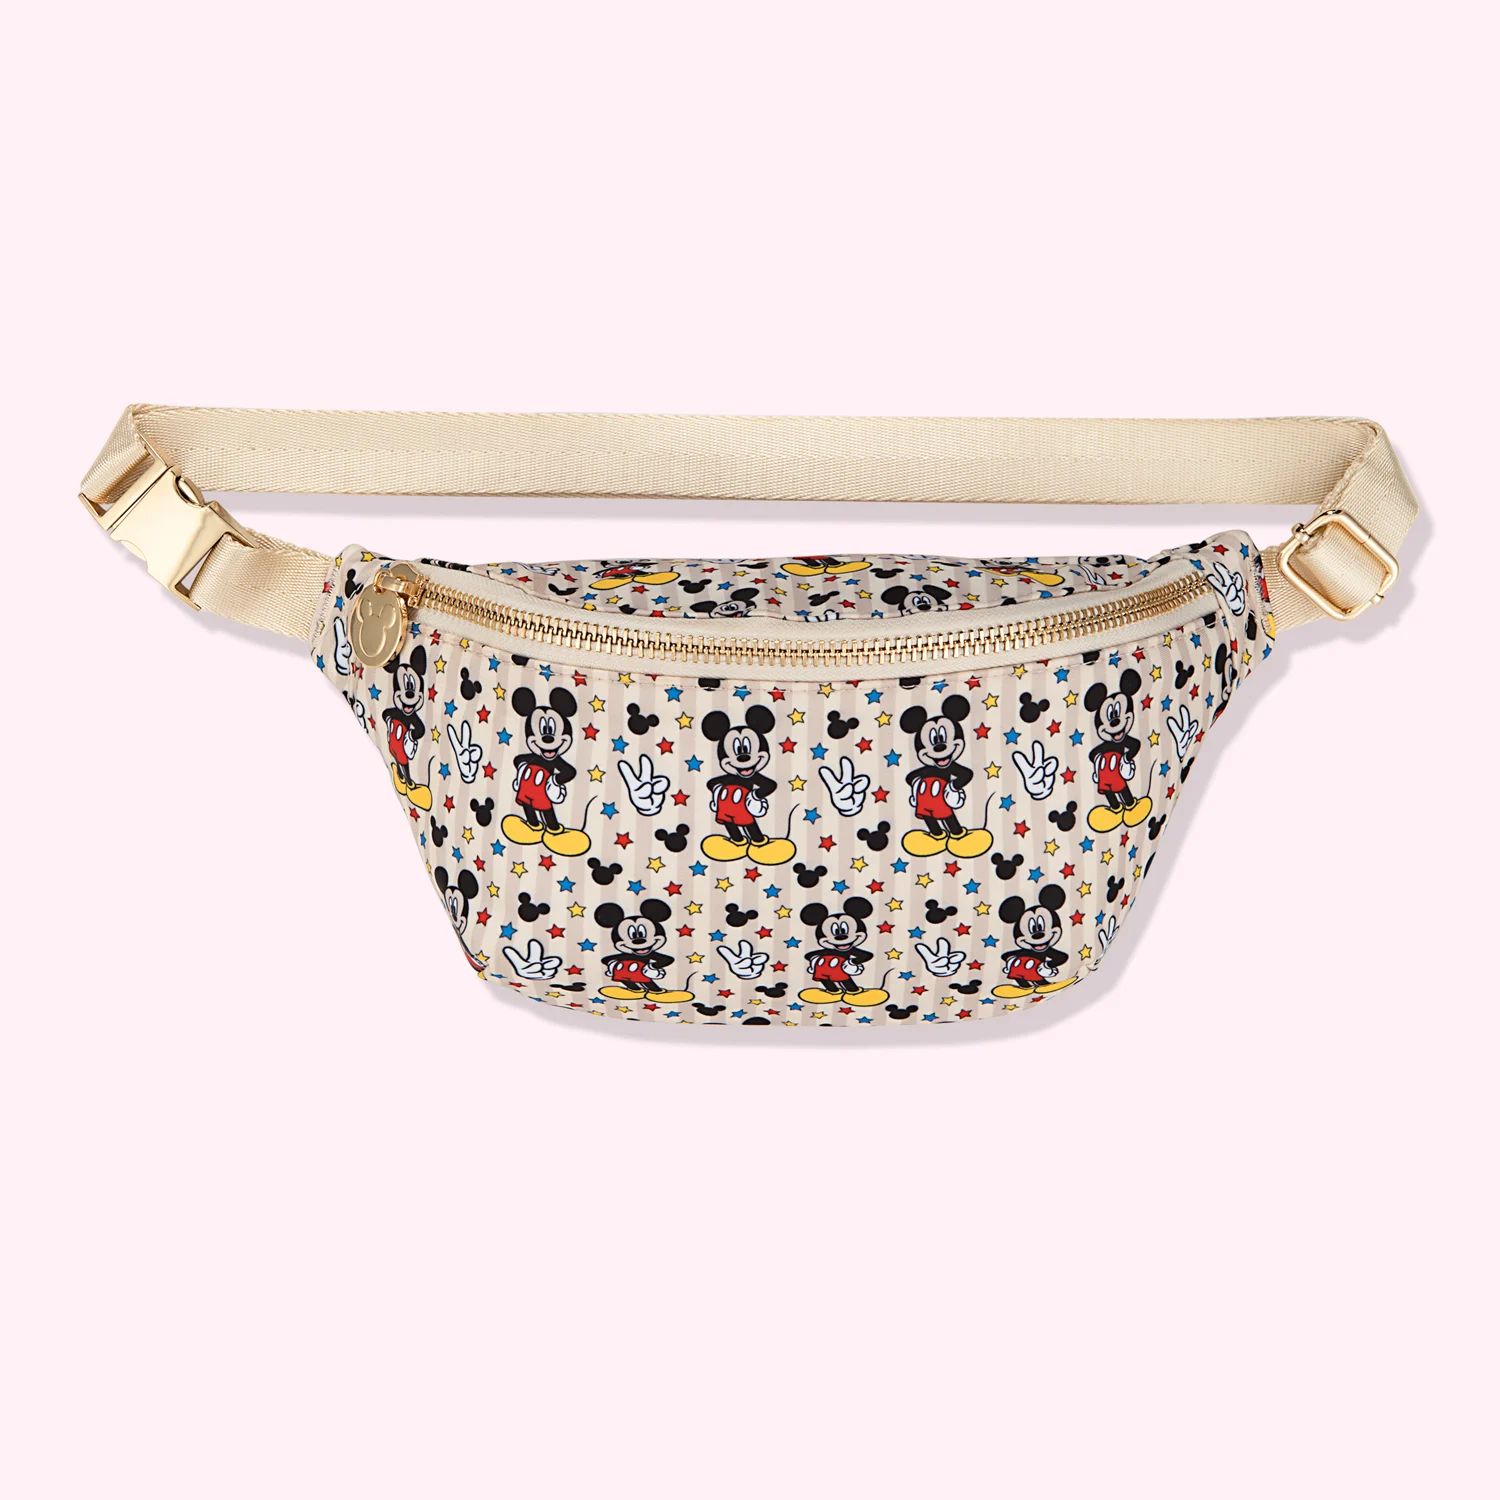 Yours Truly Fanny Pack | SCLN Customizable Fanny Pack - Stoney Clover Lane | Stoney Clover Lane